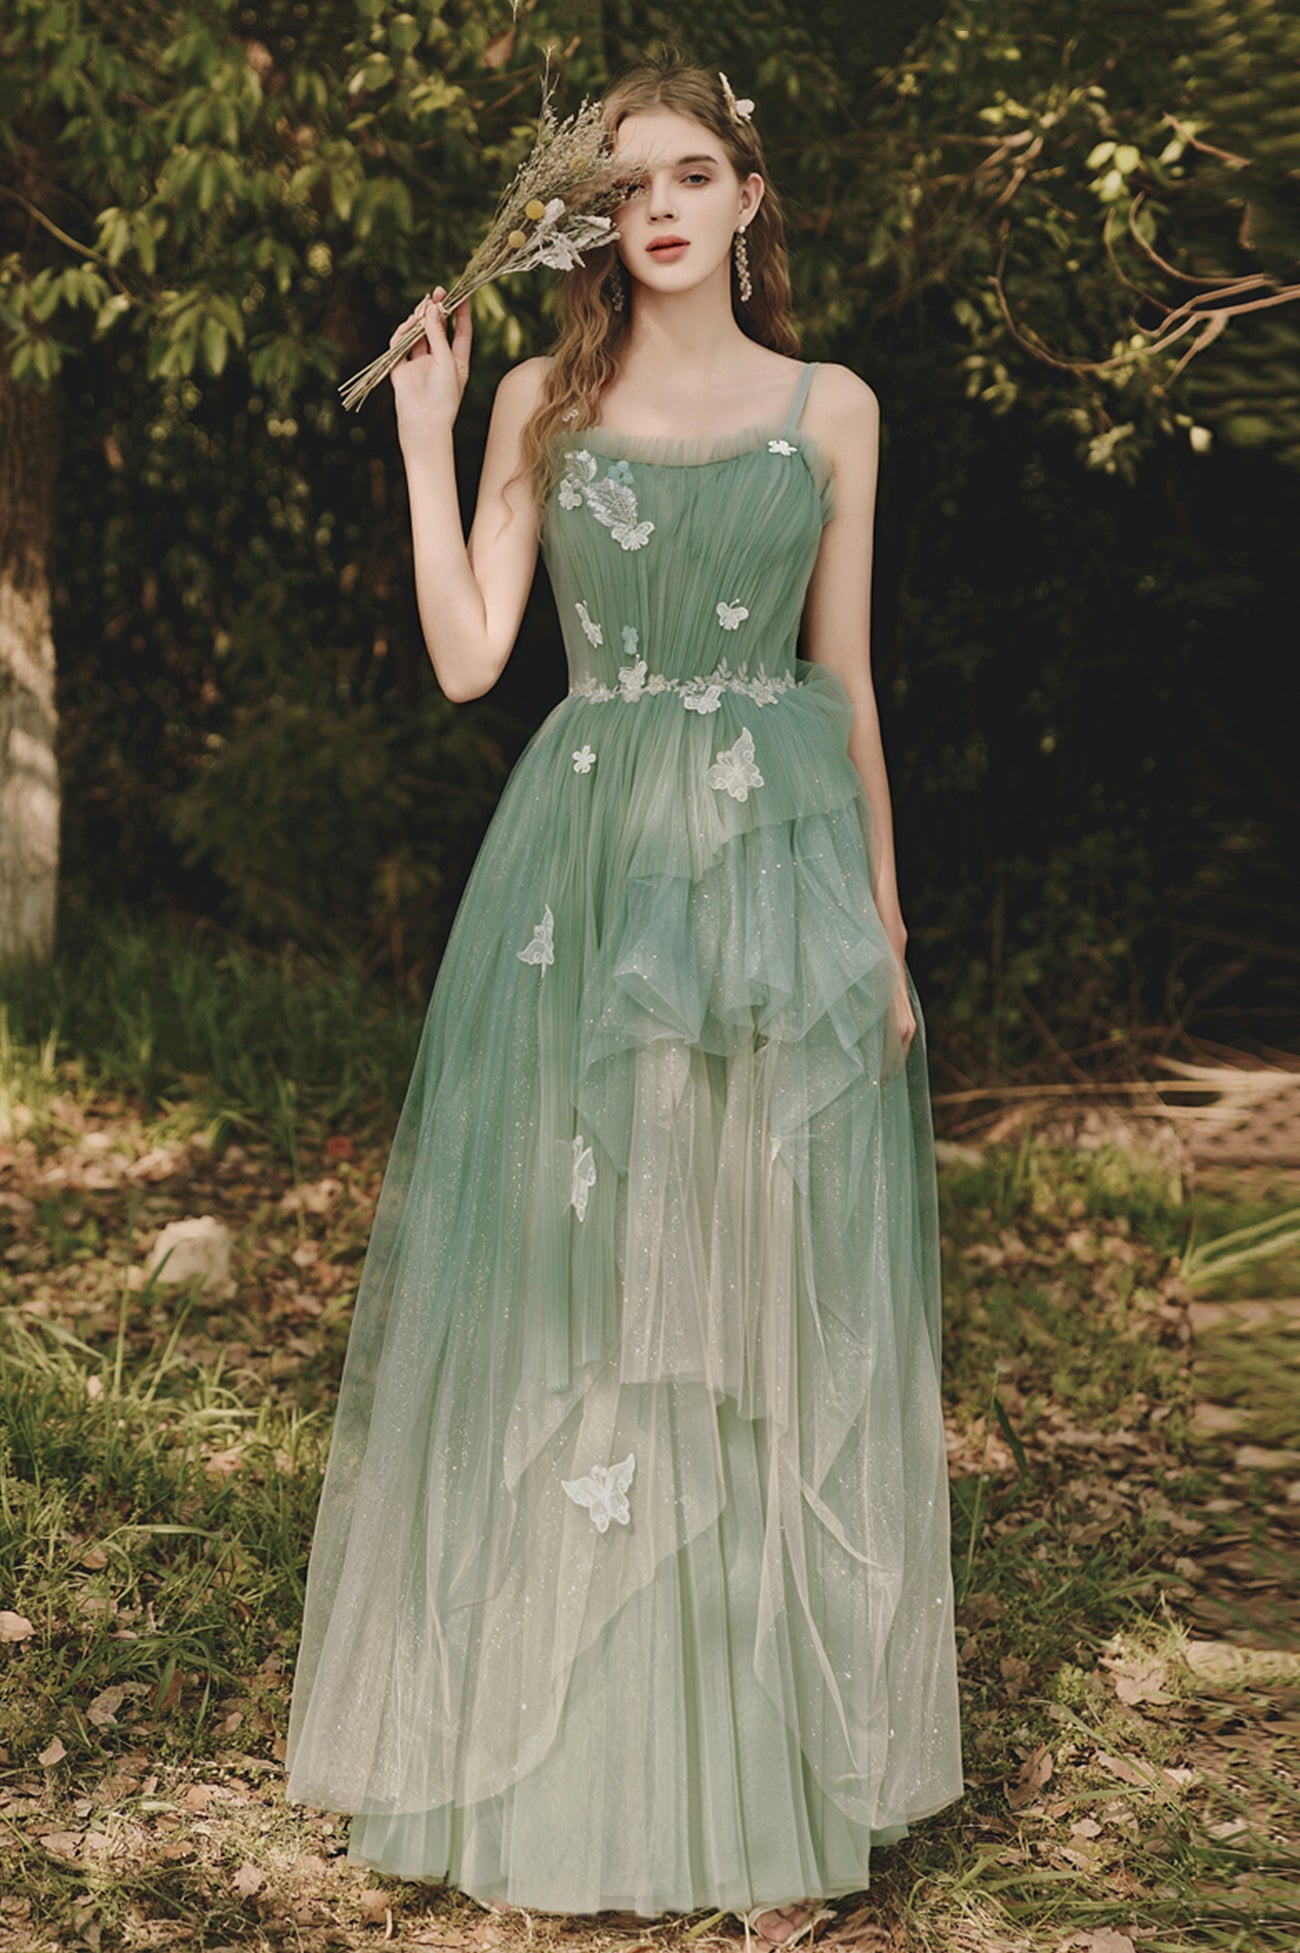 Green Tulle Lace Long Prom Dress, Beautiful Spaghetti Strap Evening Party Dress